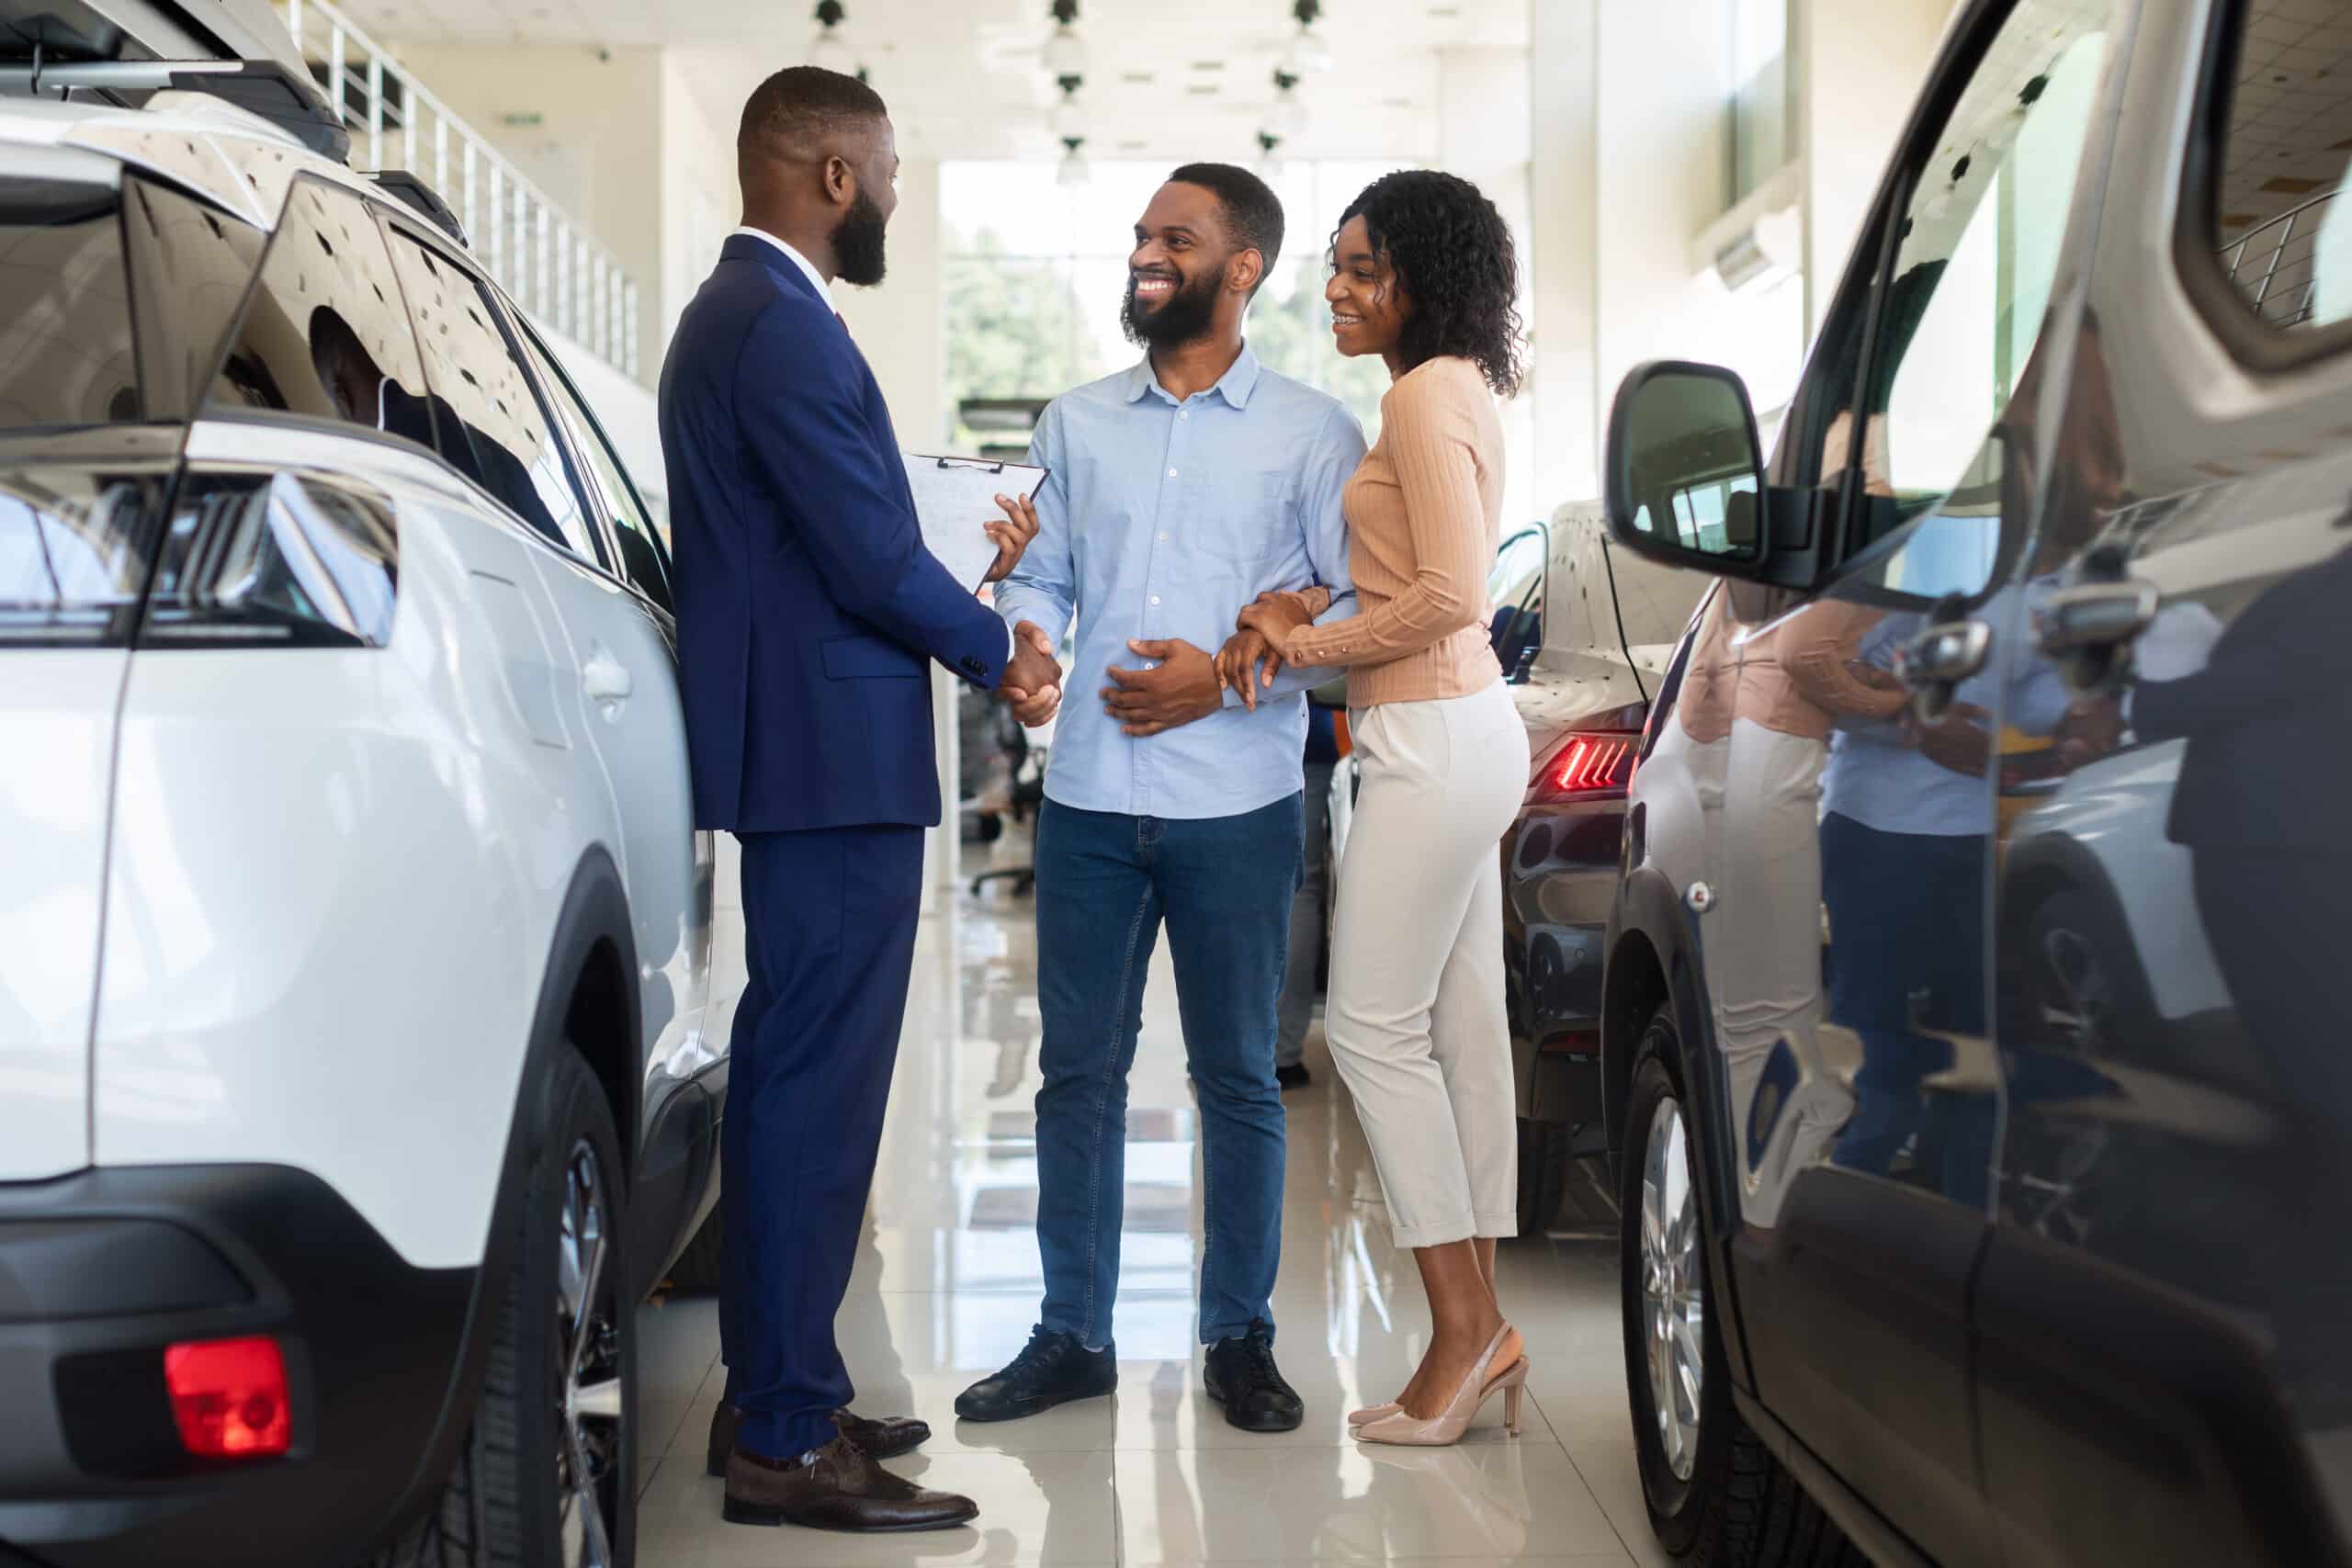 A smiling man and woman stand between vehicles in a car dealership as the man shakes hands with a car salesperson.